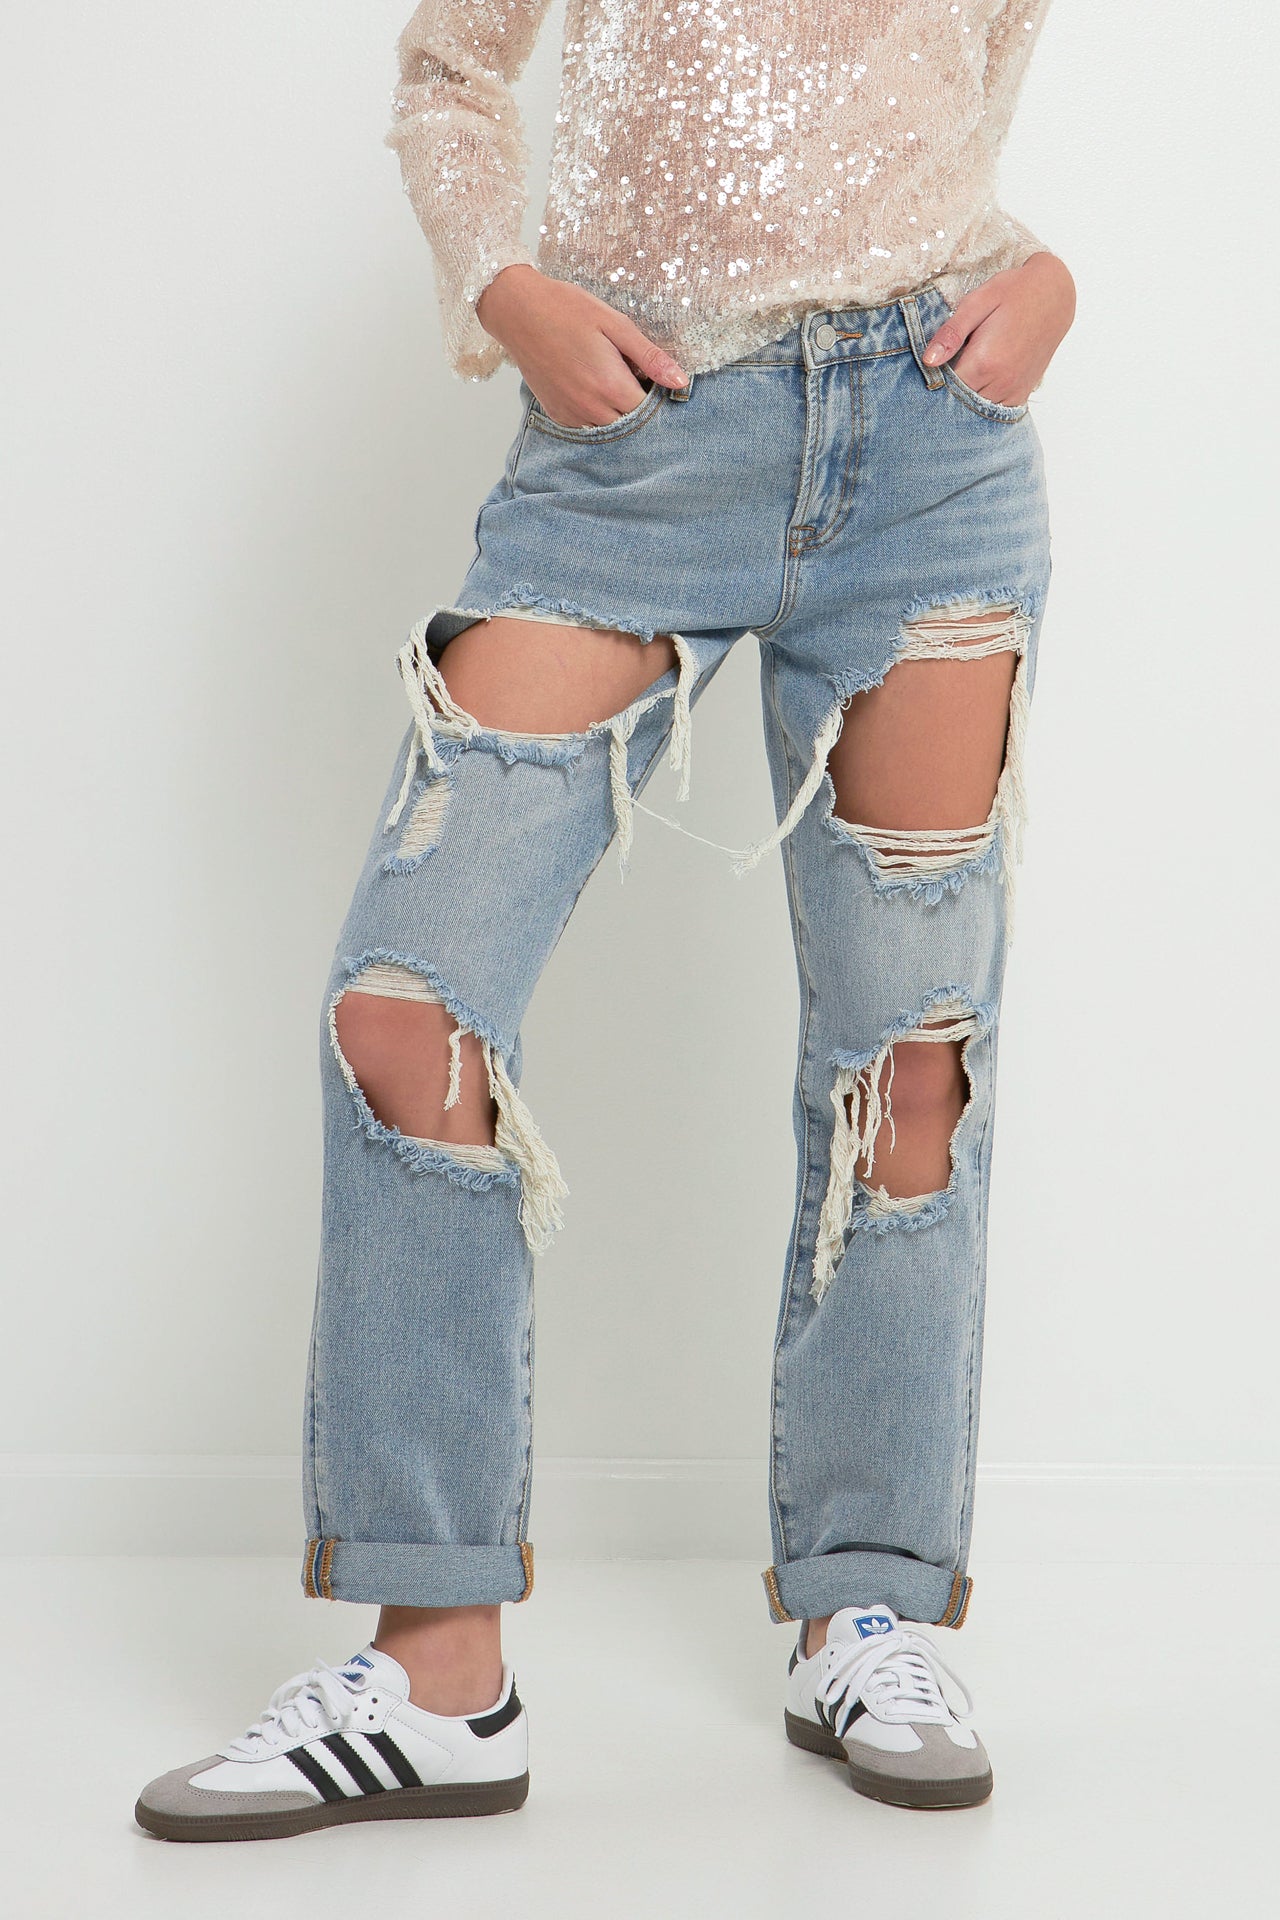 GREY LAB-Distressed Denim-JEANS available at Objectrare